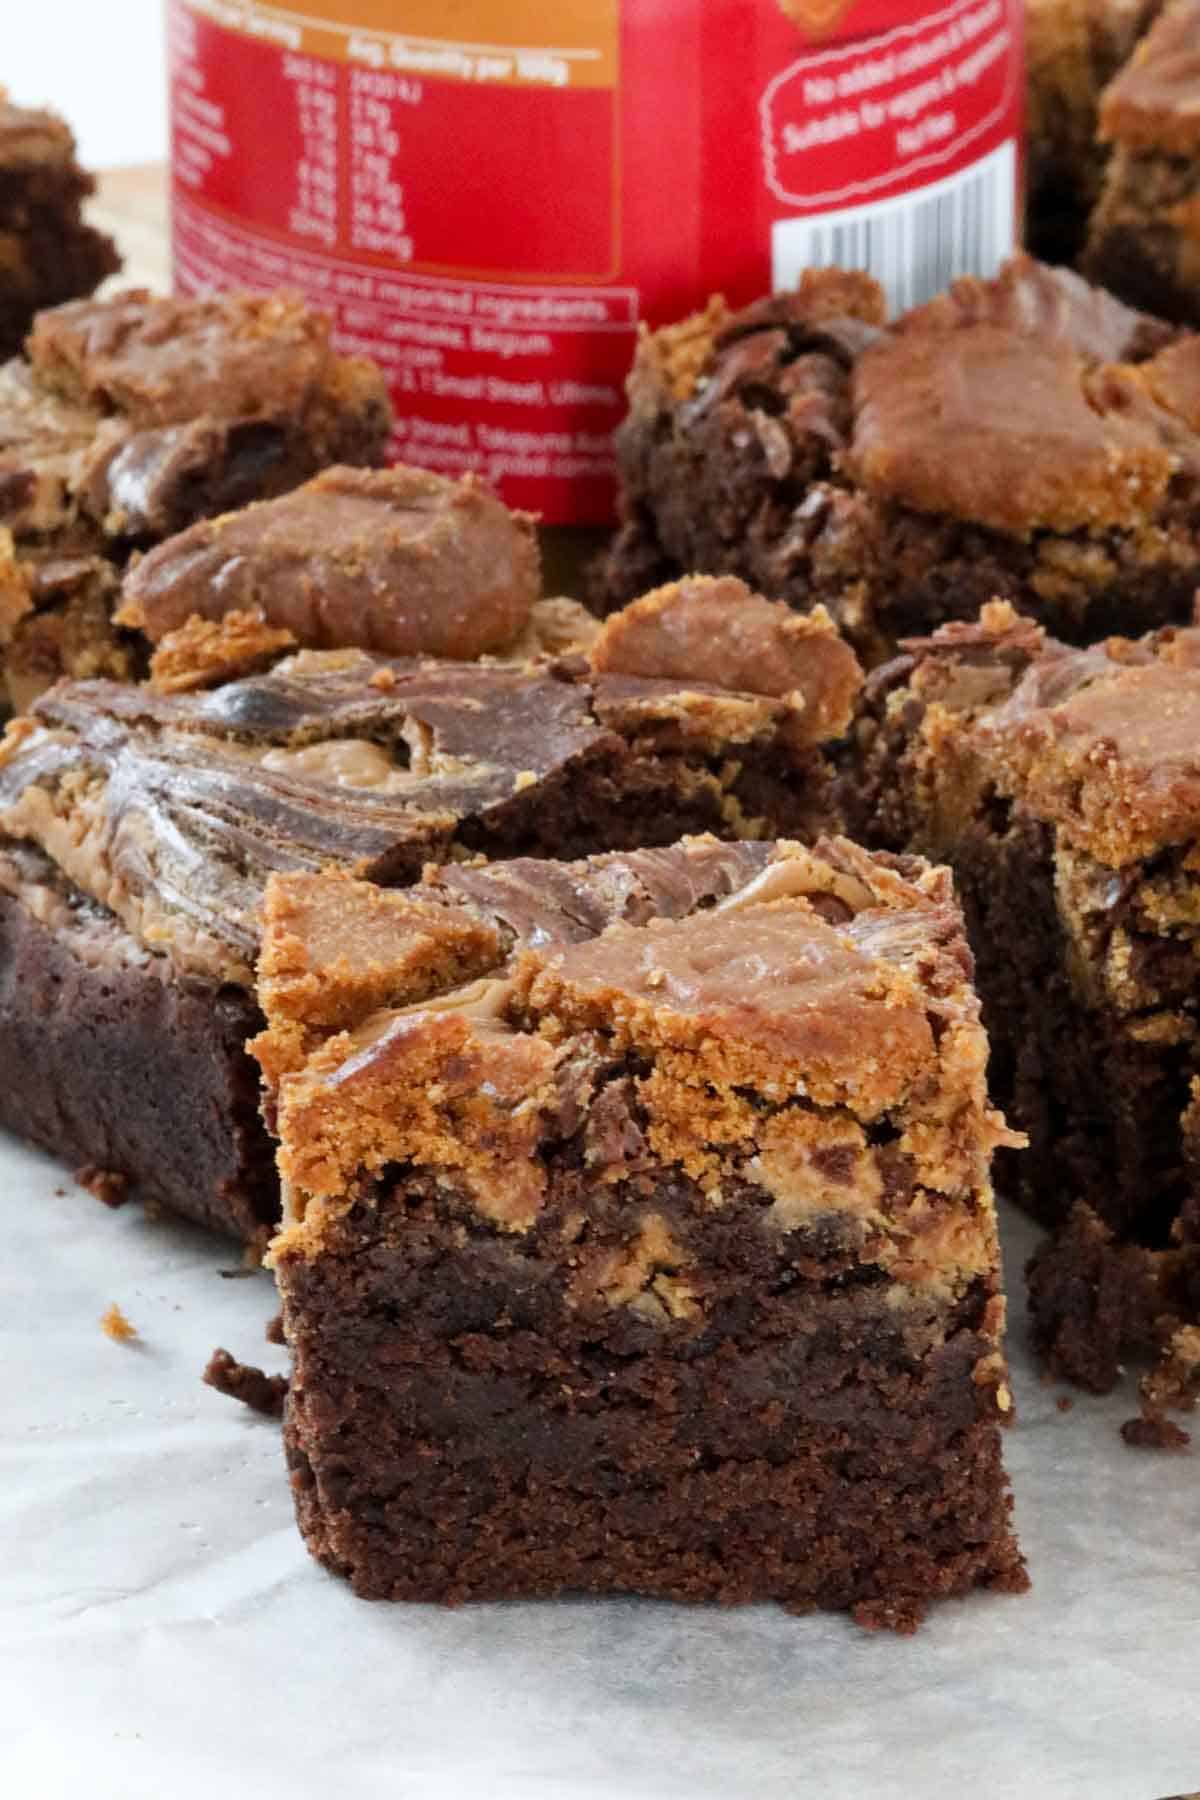 Brownie squares with a jar of Biscoff spread in the background.